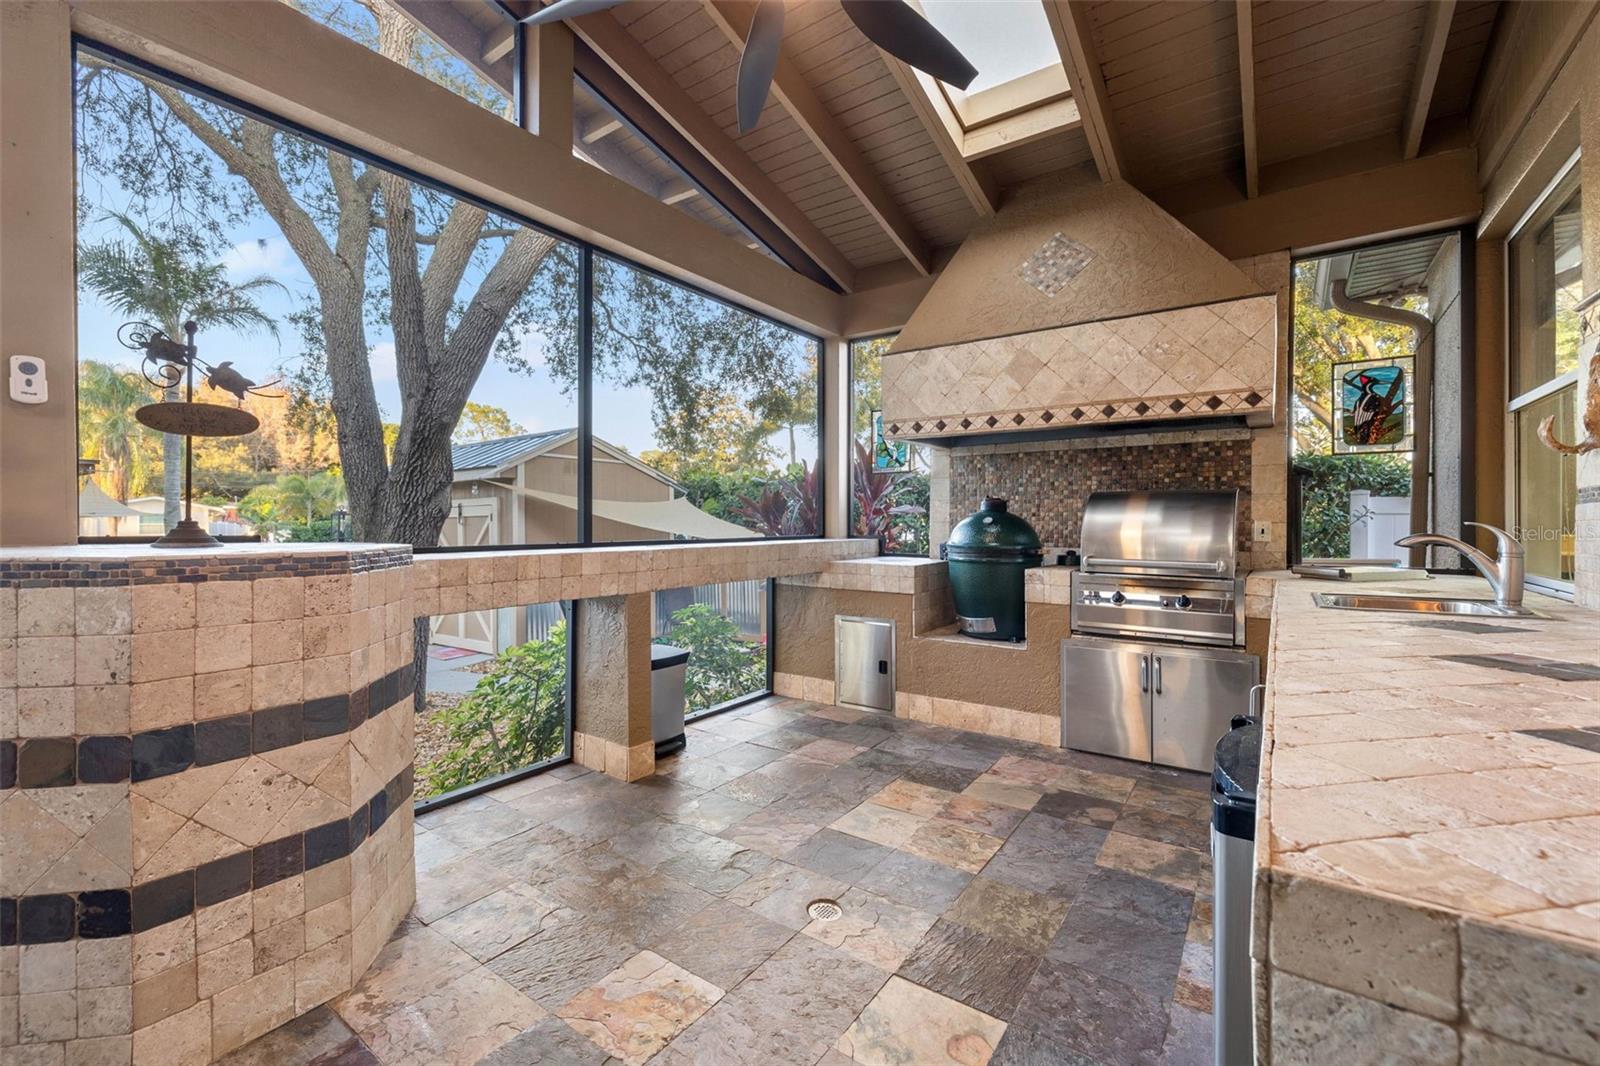 Screened outdoor kitchen with green egg smoker